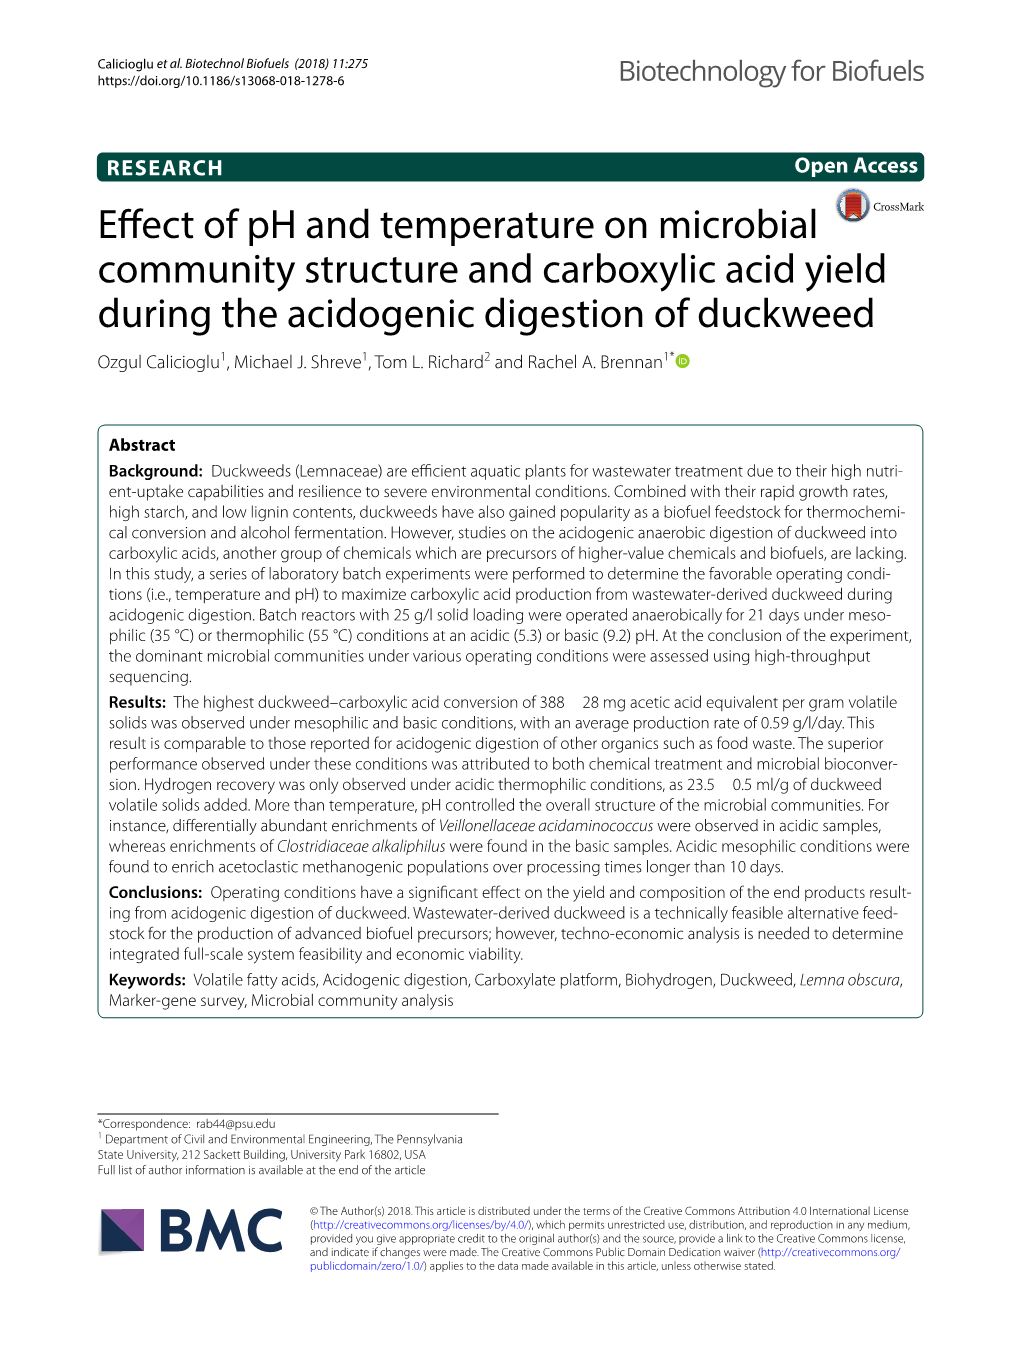 Effect of Ph and Temperature on Microbial Community Structure And